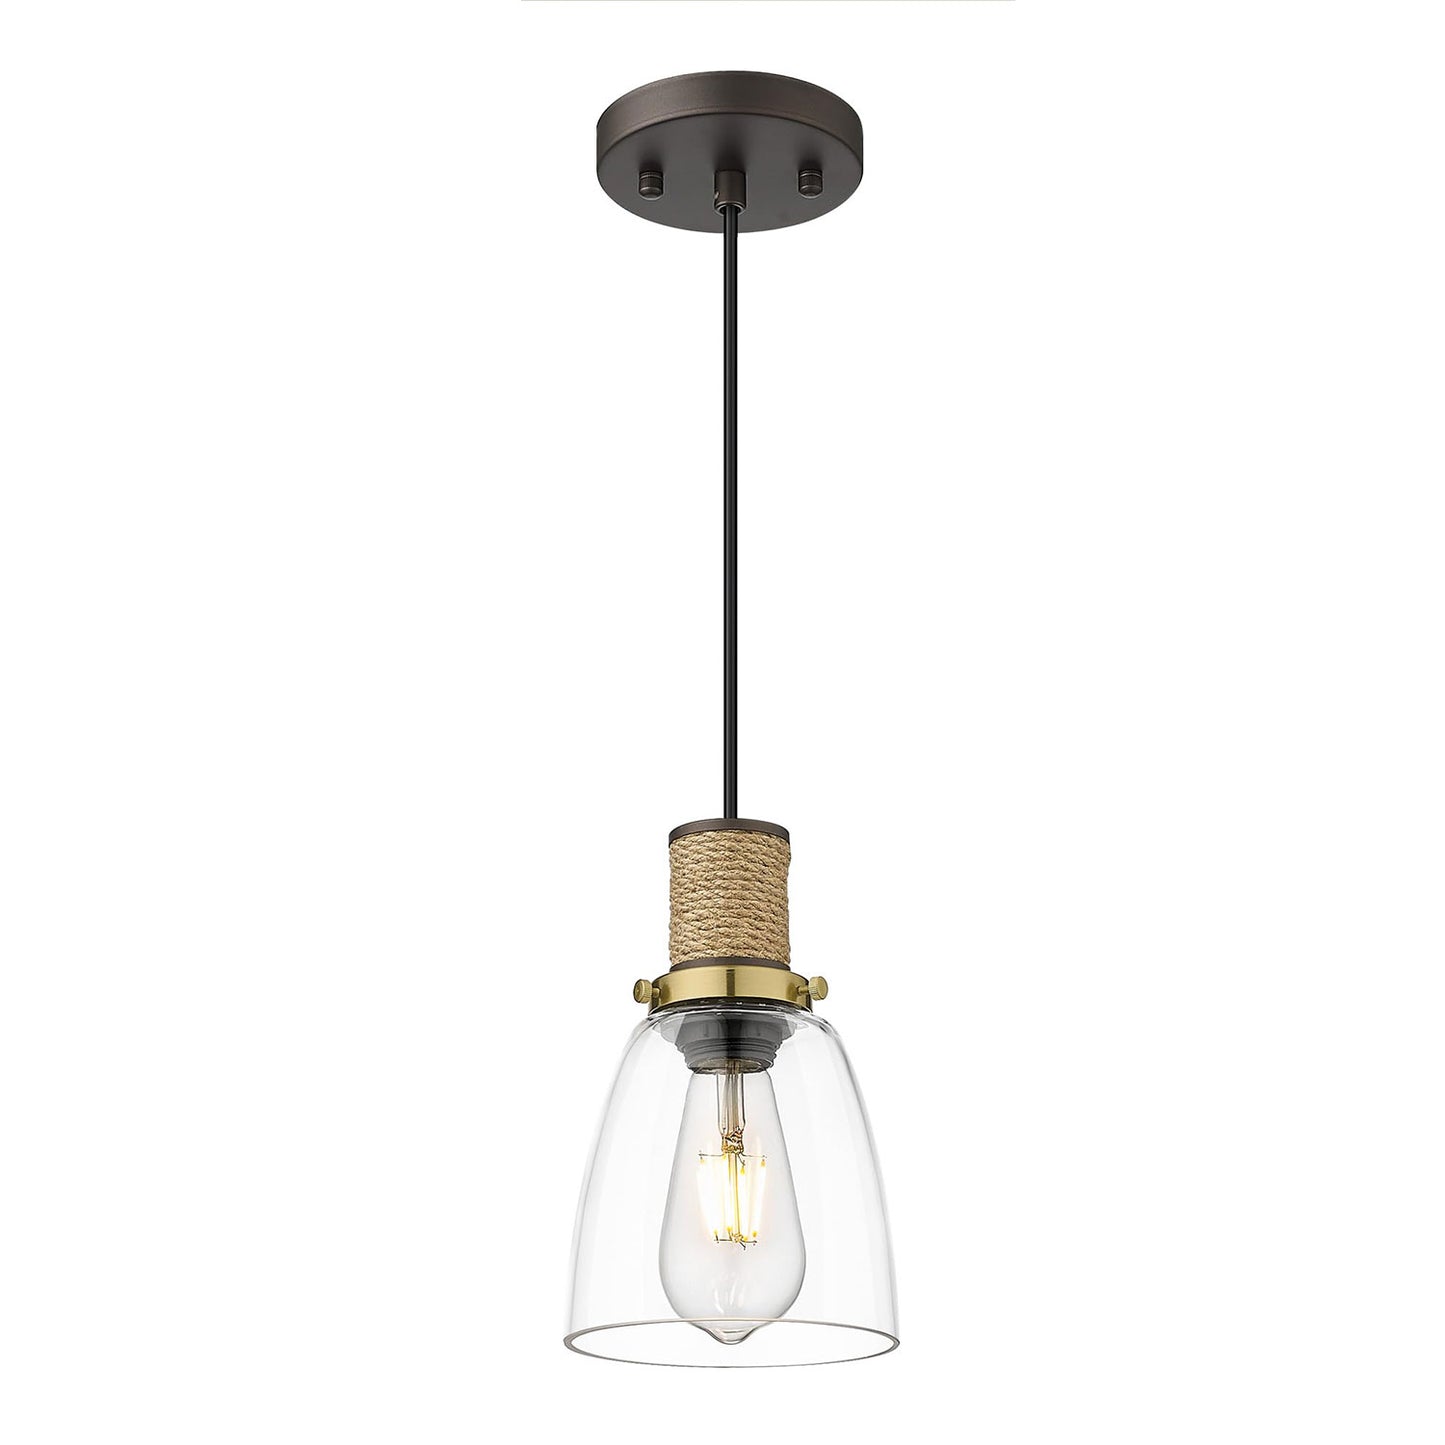 
                  
                    HWH Glass Pendant Light Fixtures, Farmhouse Pendant Lighting 1-Light Hanging Lights for Kitchen Island Schoolhouse Barn, Cone Glass Shade, Oil-Rubbed Bronze and Brass Finish, 5HZG93MIL ORB+BG
                  
                